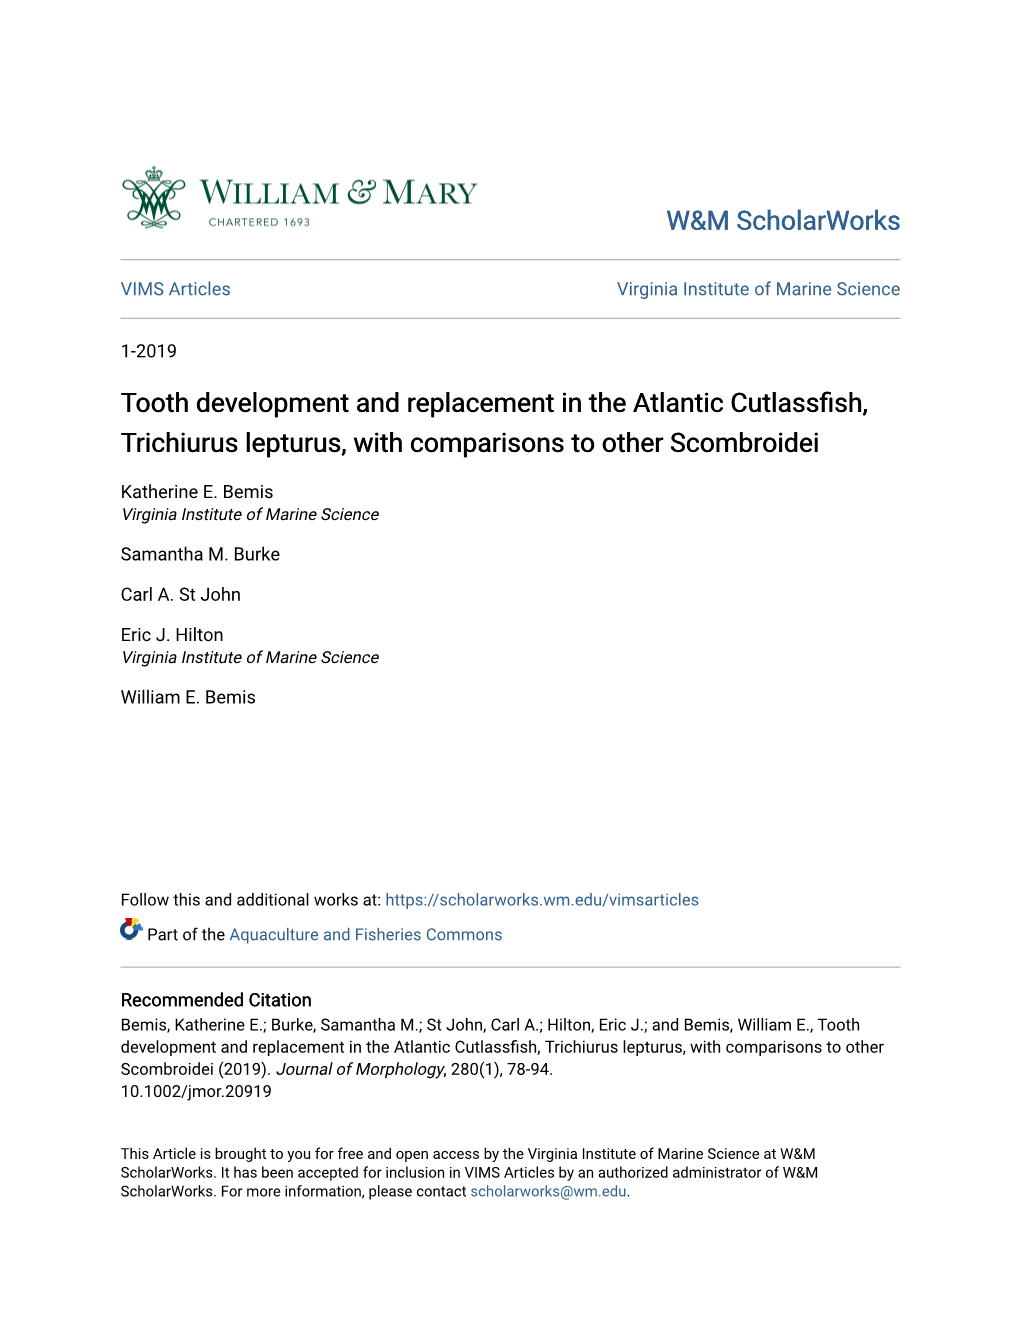 Tooth Development and Replacement in the Atlantic Cutlassfish, Trichiurus Lepturus, with Comparisons to Other Scombroidei